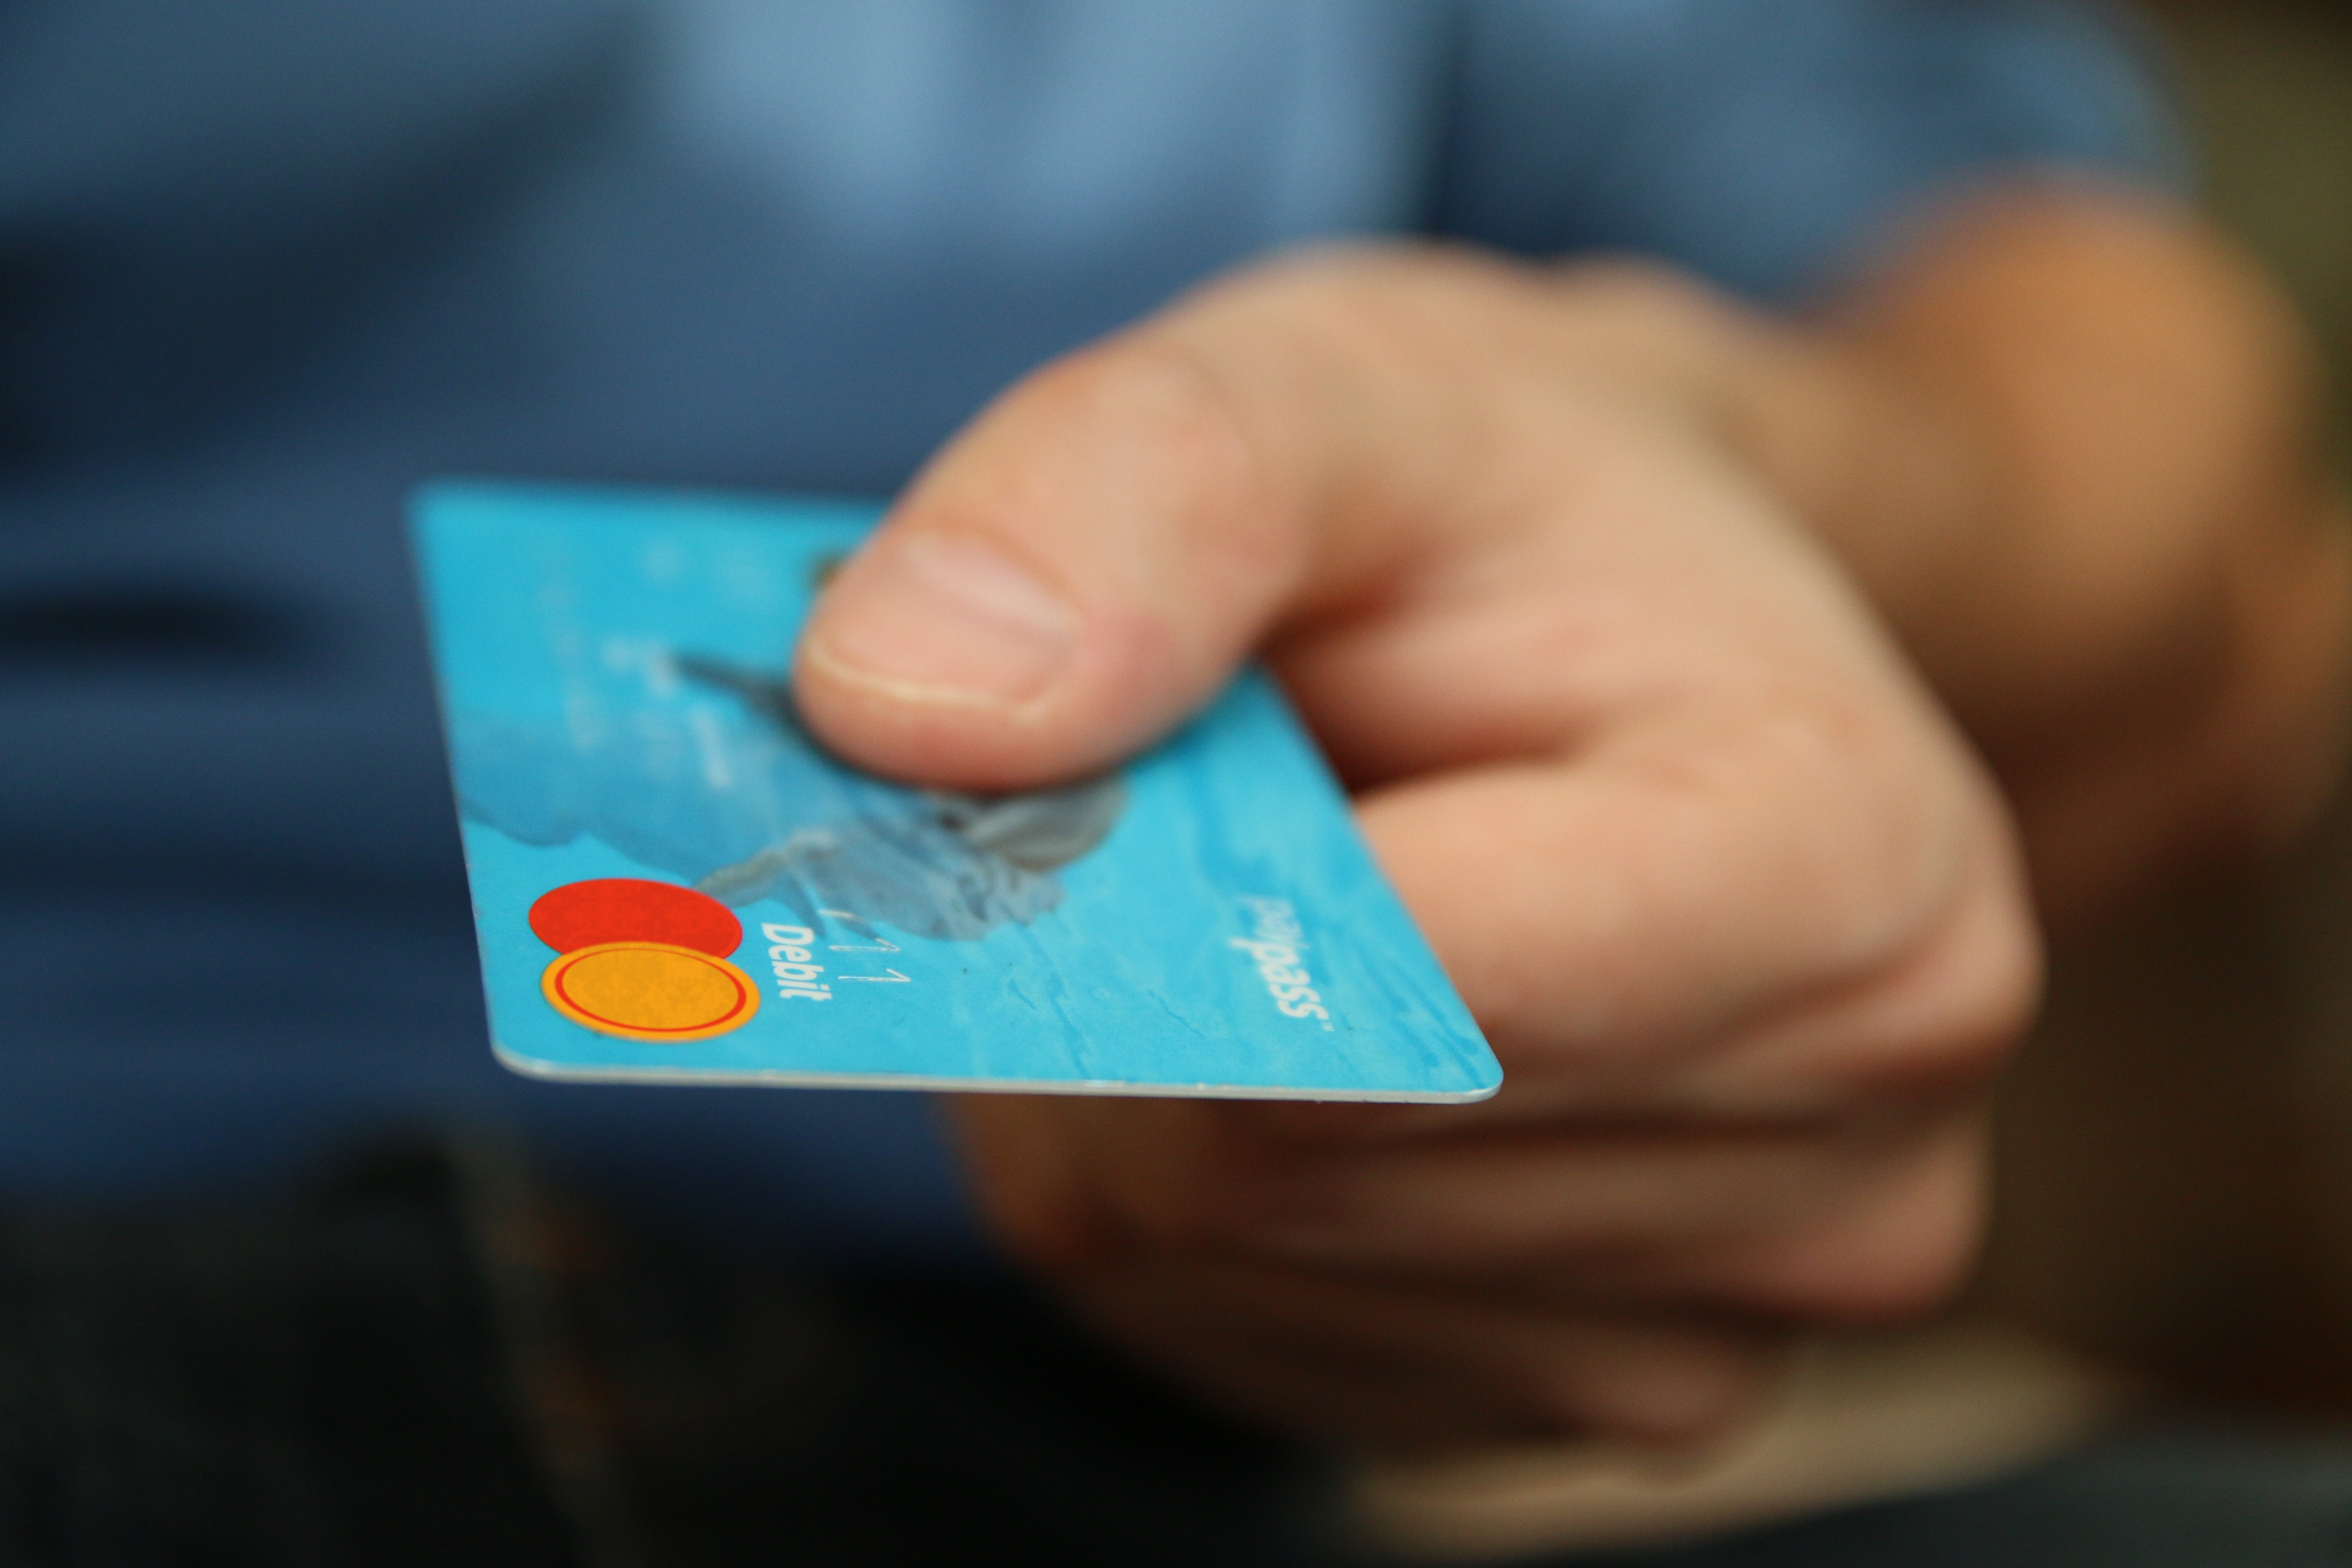 1 in 5 British adults has had an outstanding credit card balance for at least six months